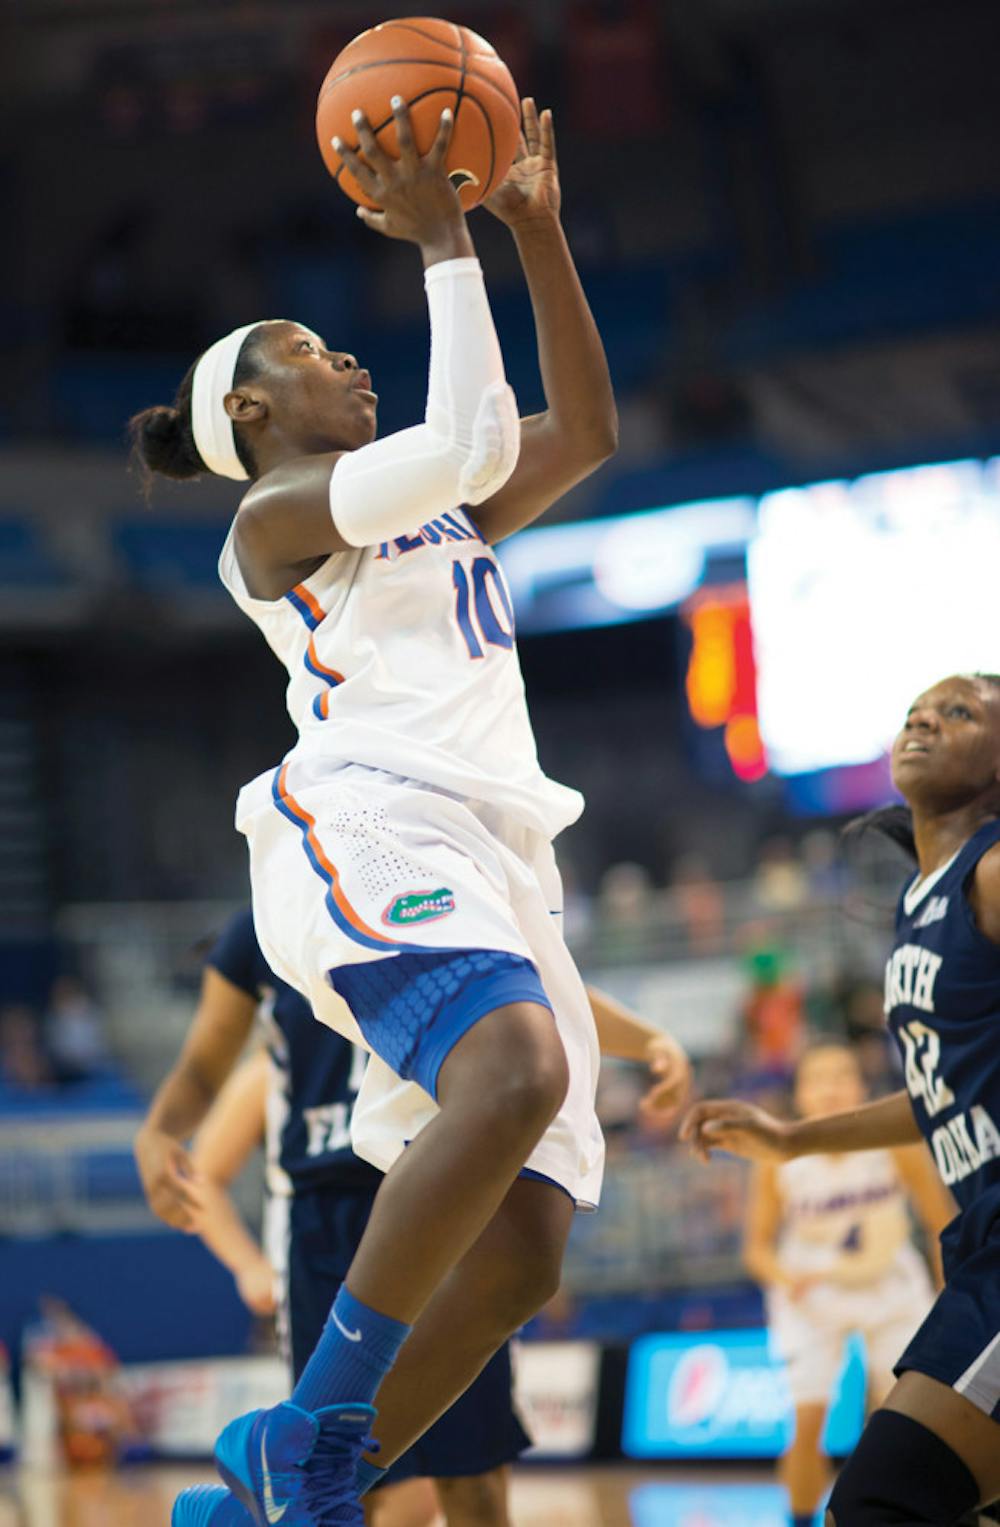 <p>Despite not leading for the entire game, the Gators overcame a 16-point halftime deficit to shock the Hoyas. After tying the game at 58 at the end of regulation, Florida quickly took its first lead of the game on a three-point-play by senior Jaterra Bonds.</p><p>With the UF lead down to 66-65, Bonds, who scored a career-high 26 points in the game, drove hard to the basket and completed one of two fouls to cement the Gators 67-75 comeback victory.</p>